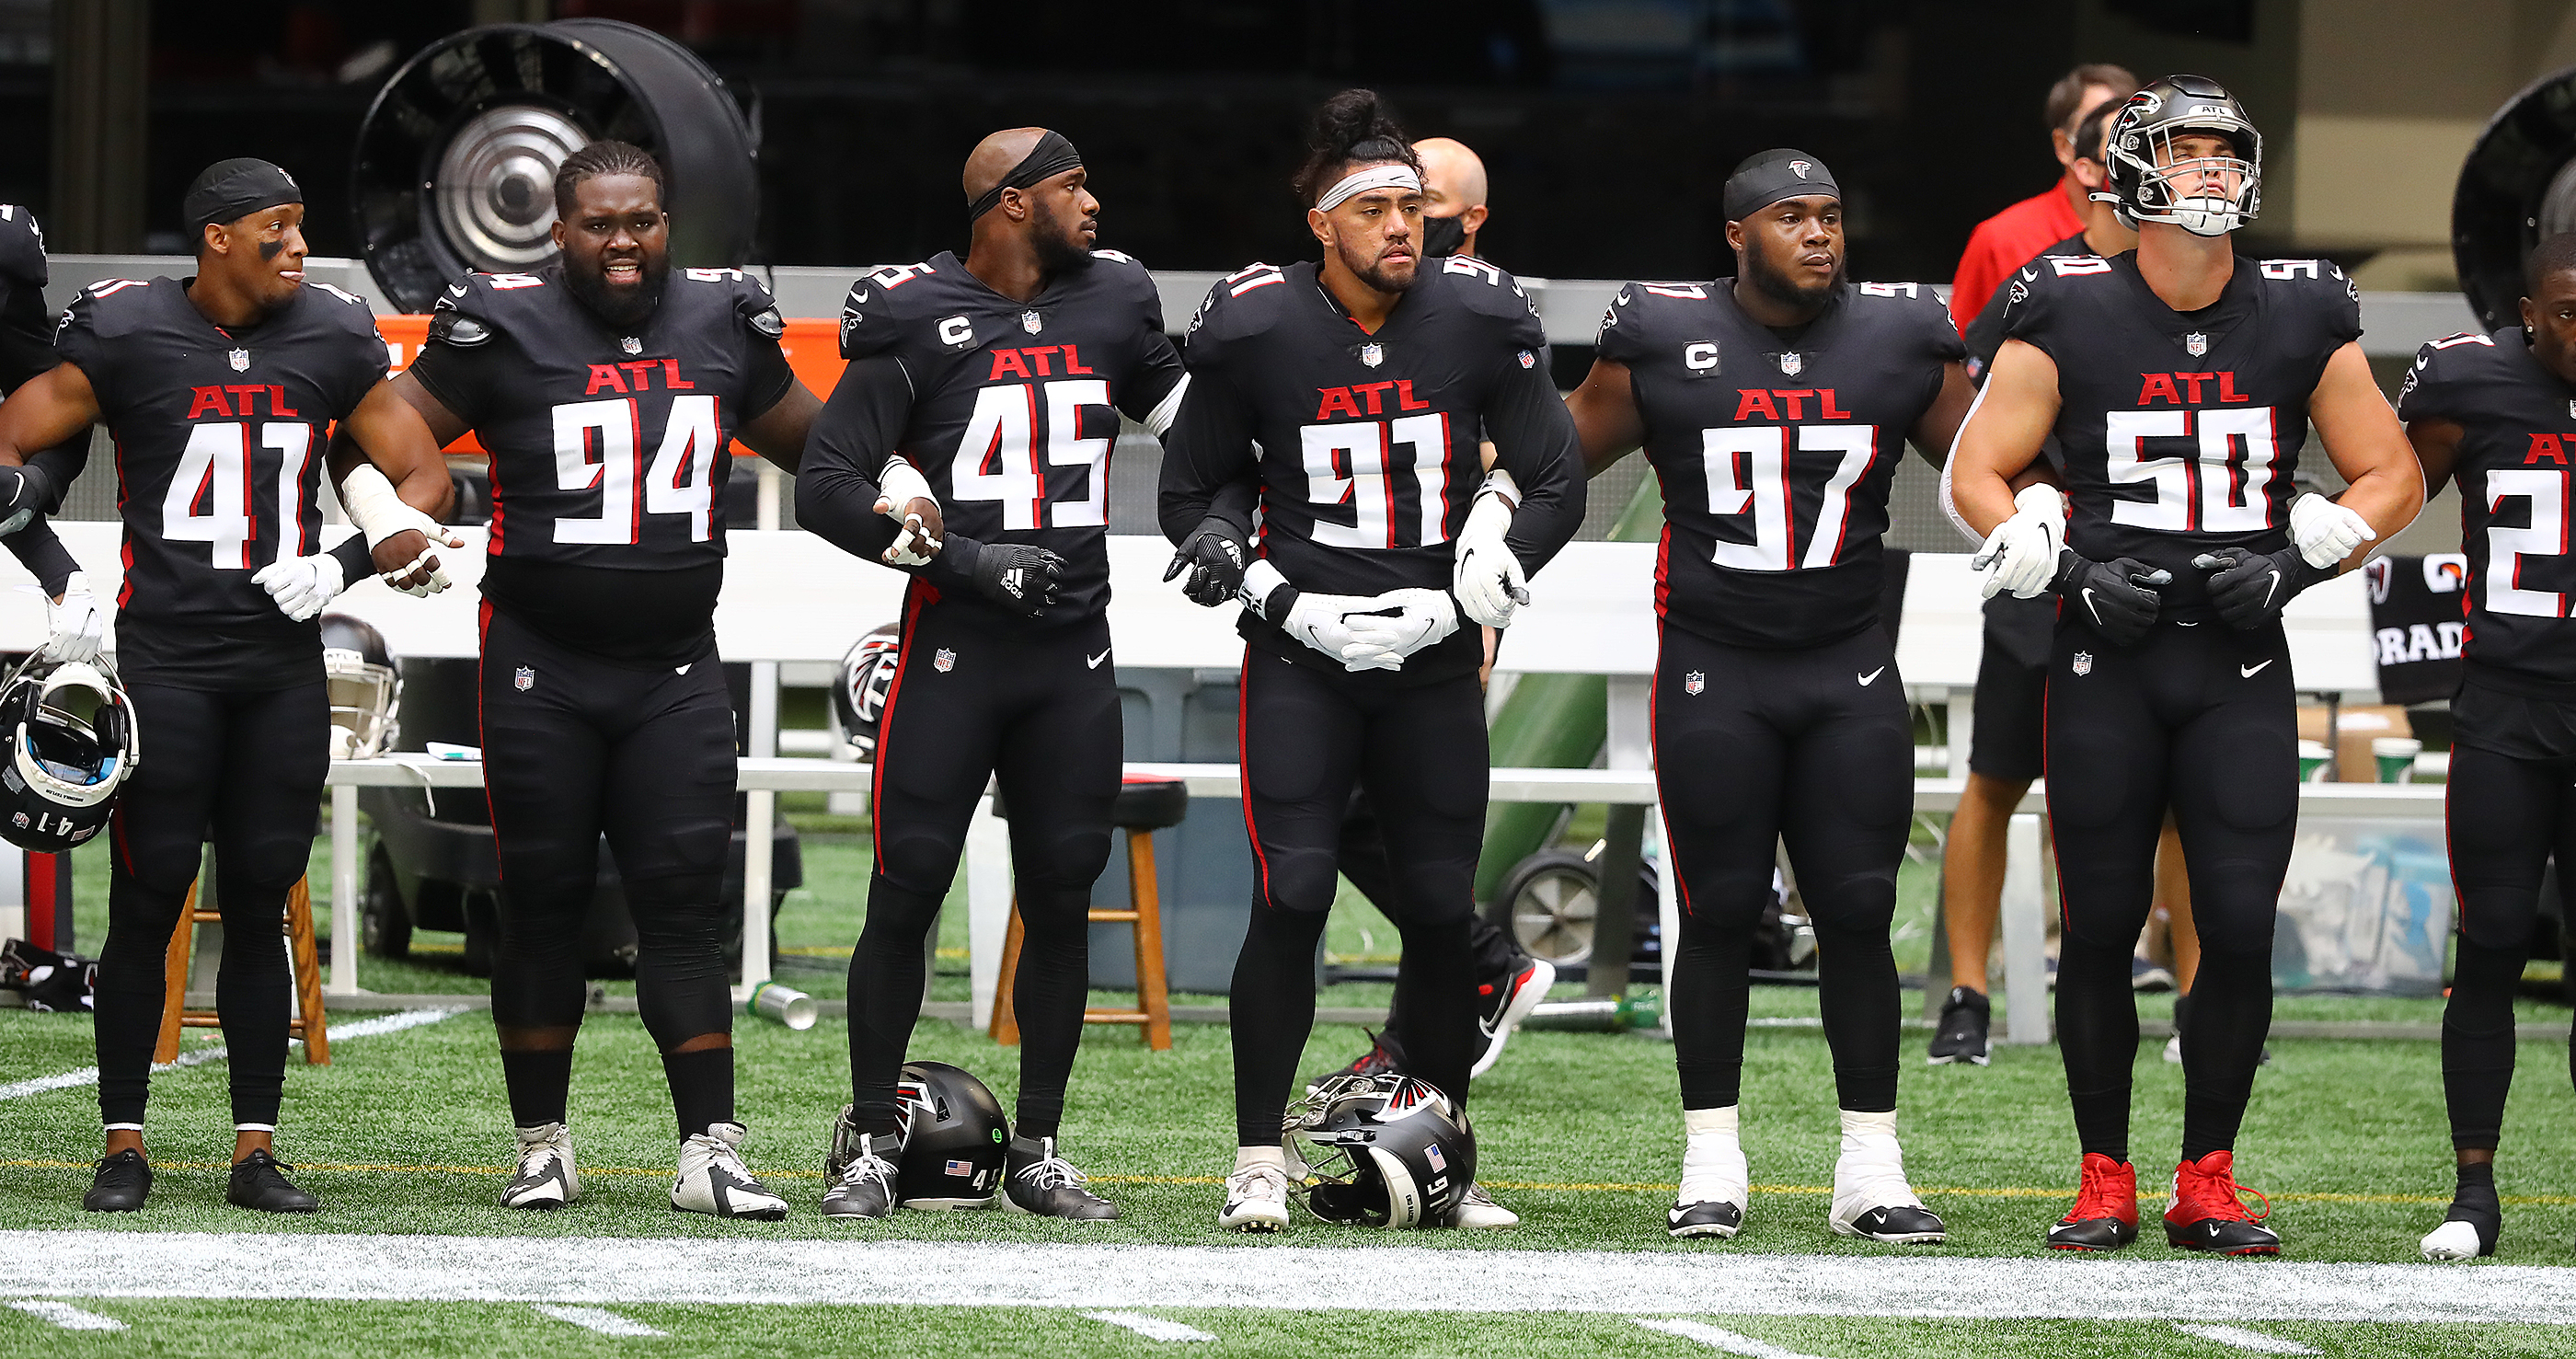 Falcons stand during both anthems; Seahawks protest